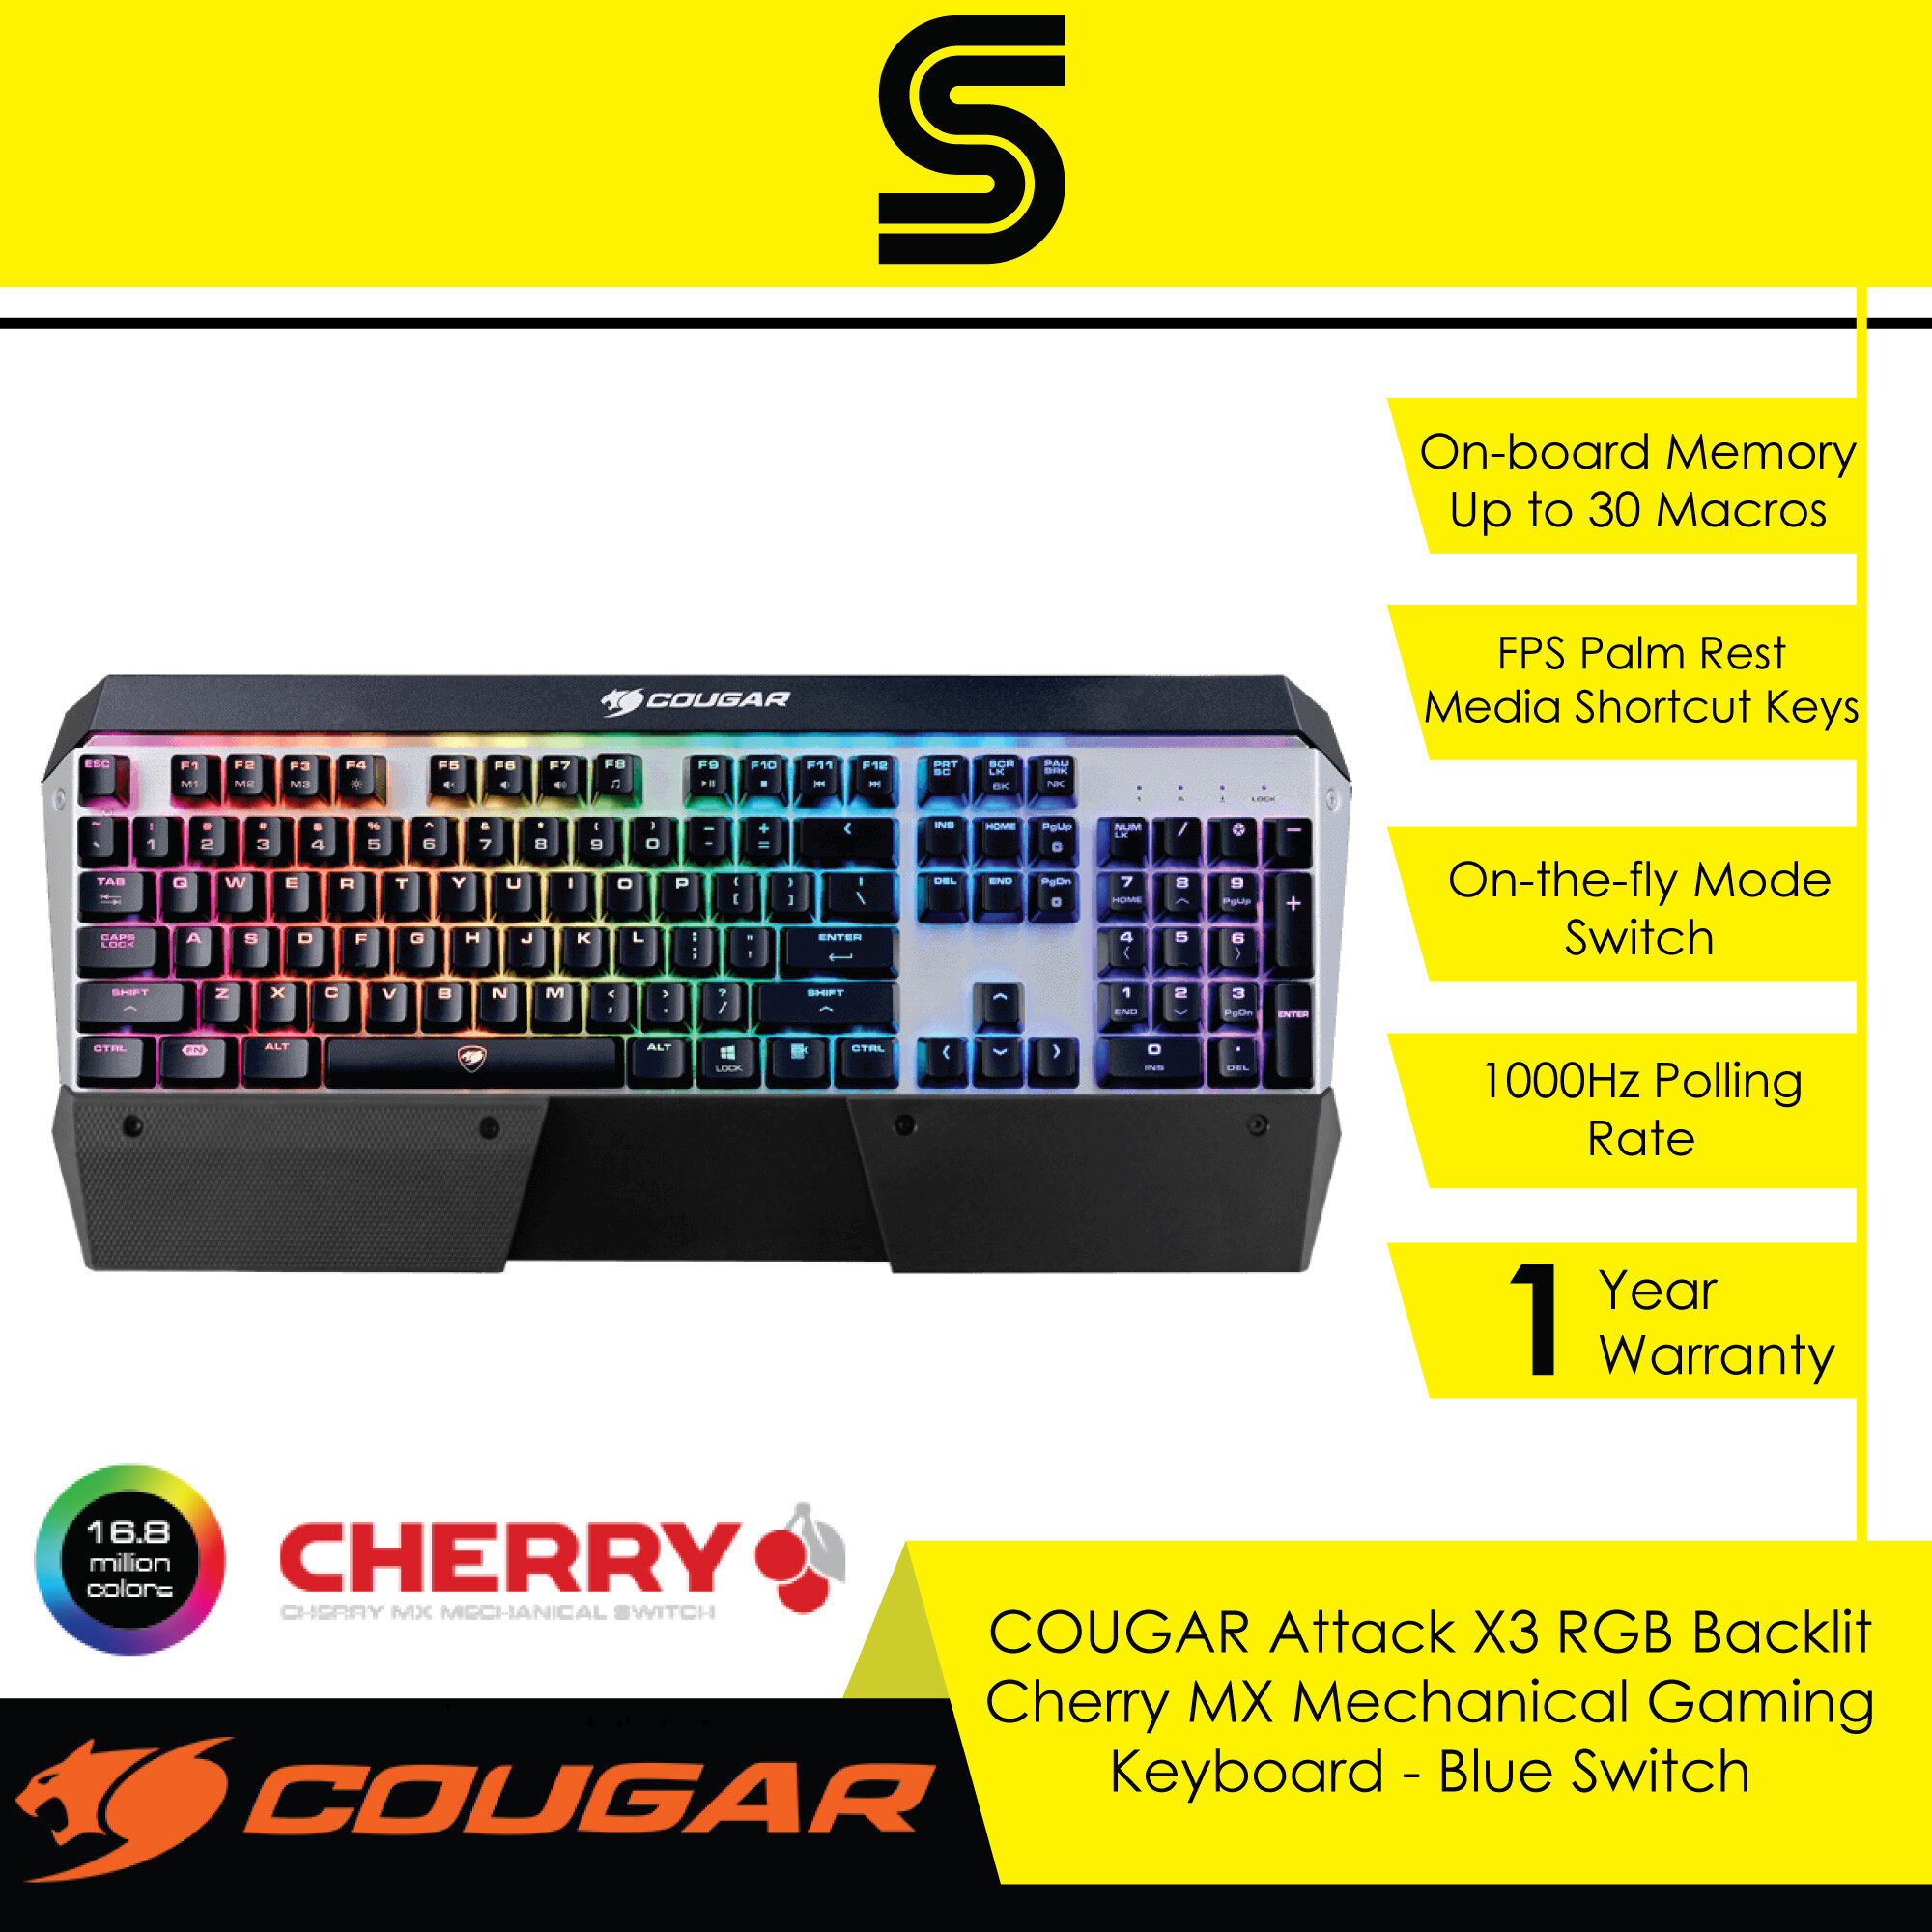 COUGAR Attack X3 RGB Backlit Cherry MX Mechanical Gaming Keyboard - Blue Switch